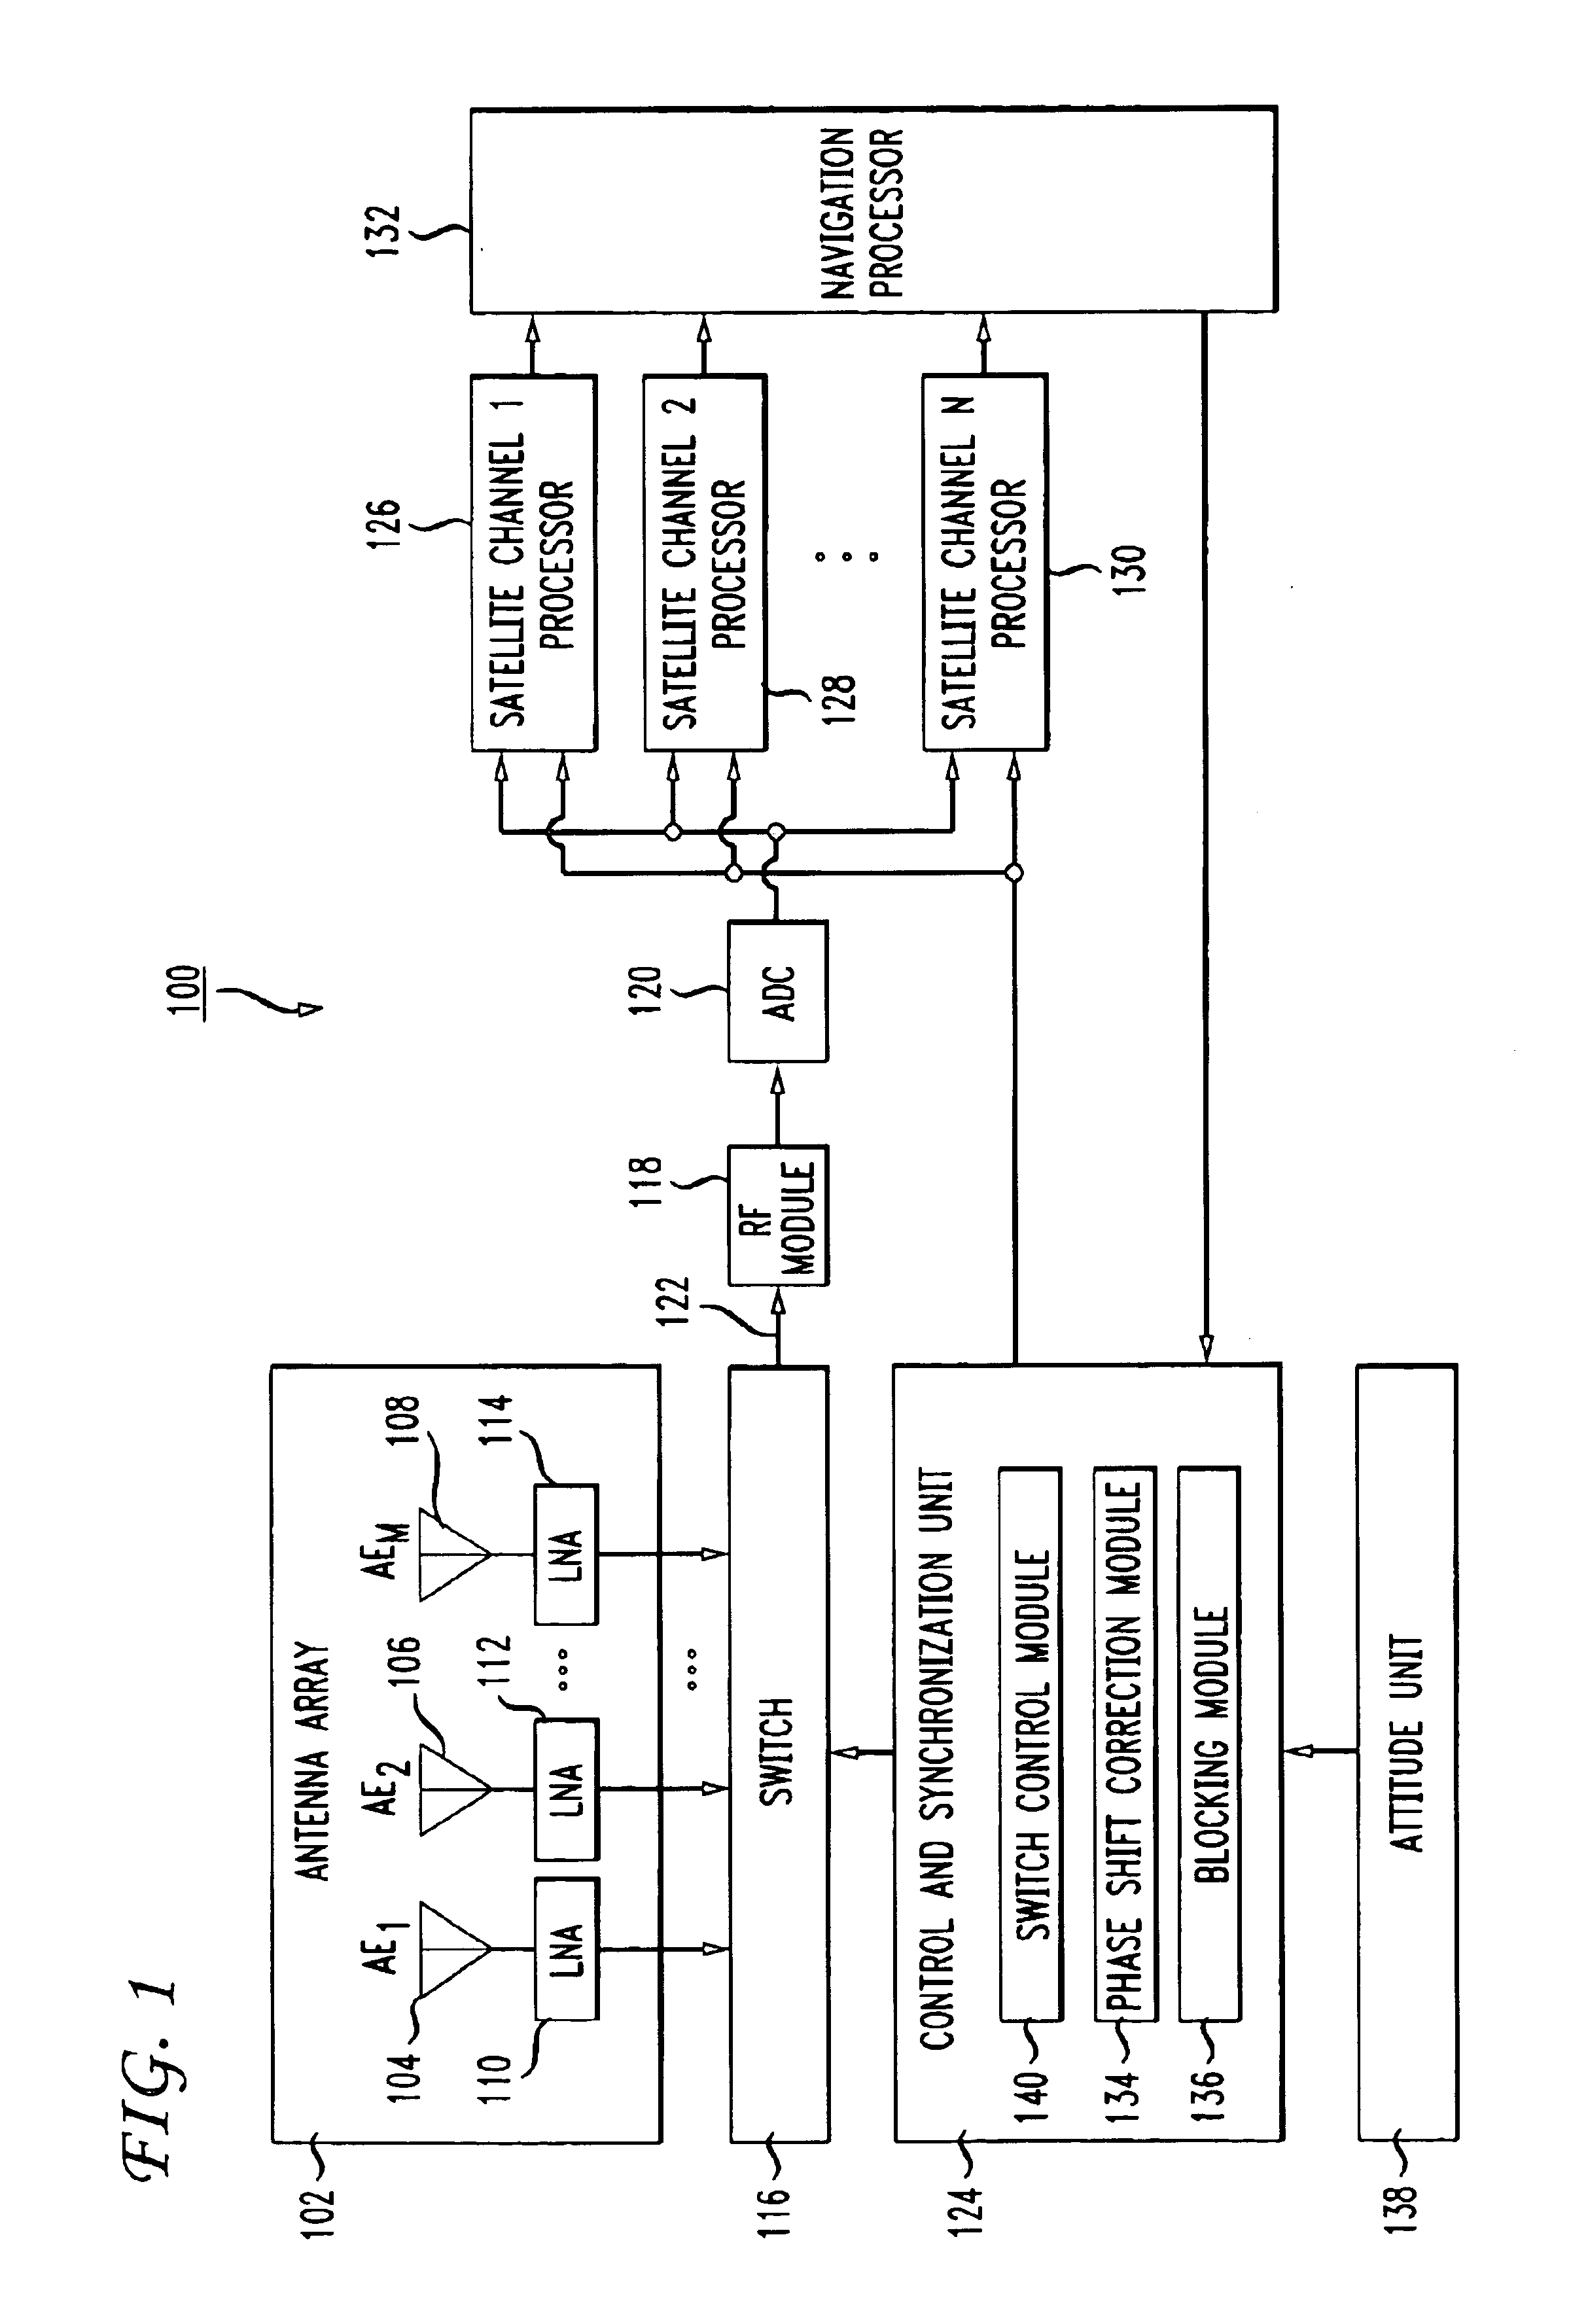 Method and apparatus for multipath mitigation using antenna array